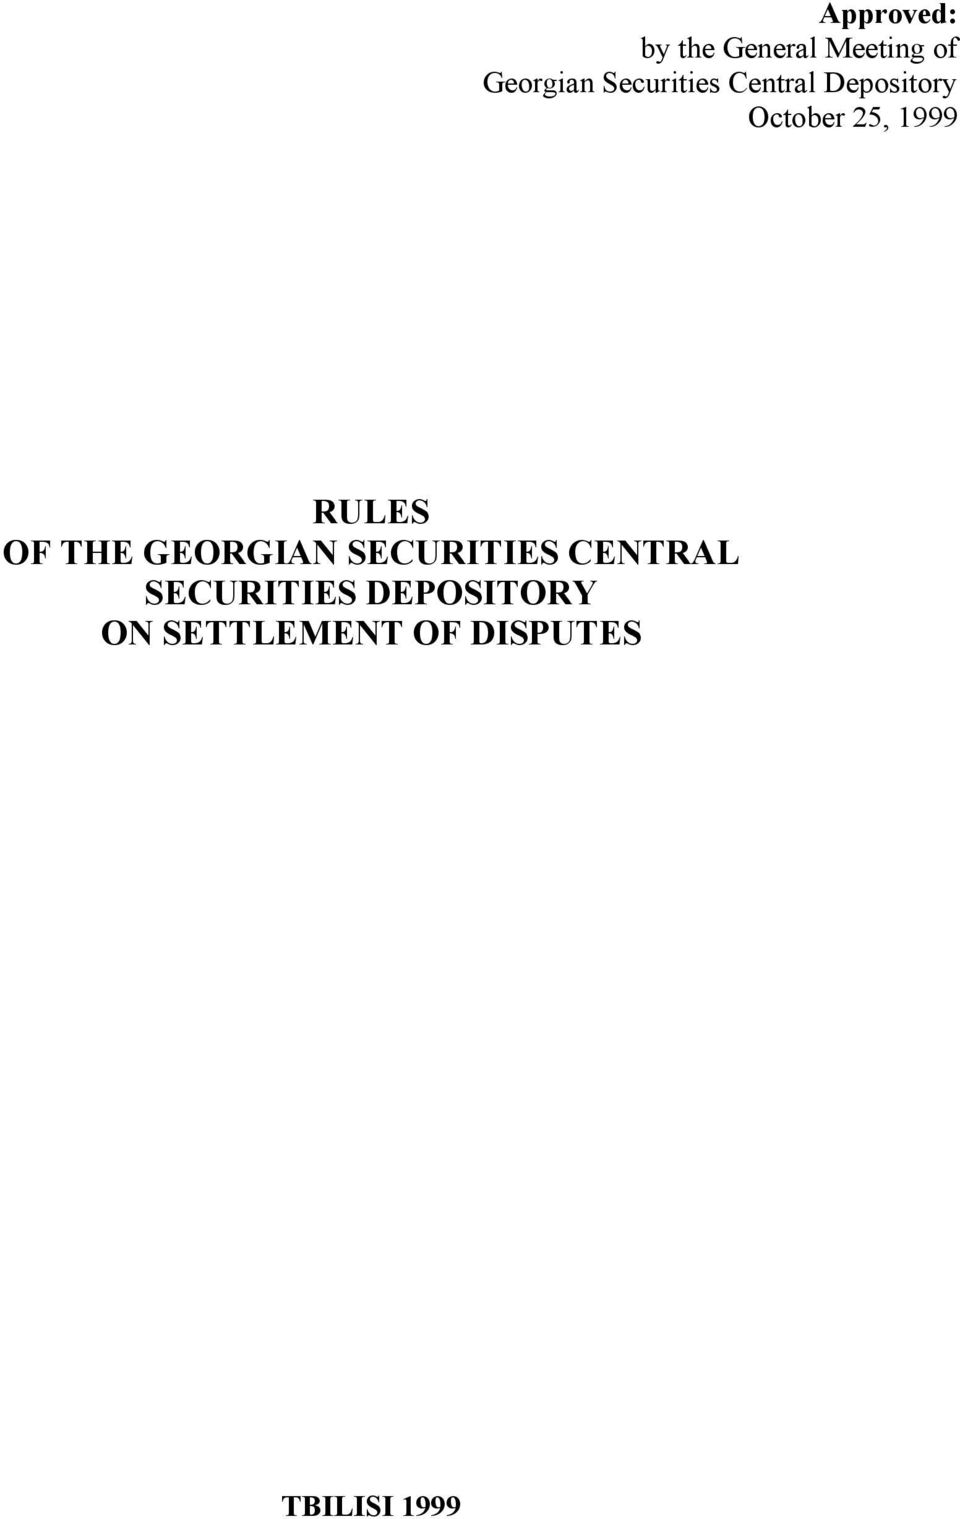 RULES OF THE GEORGIAN SECURITIES CENTRAL